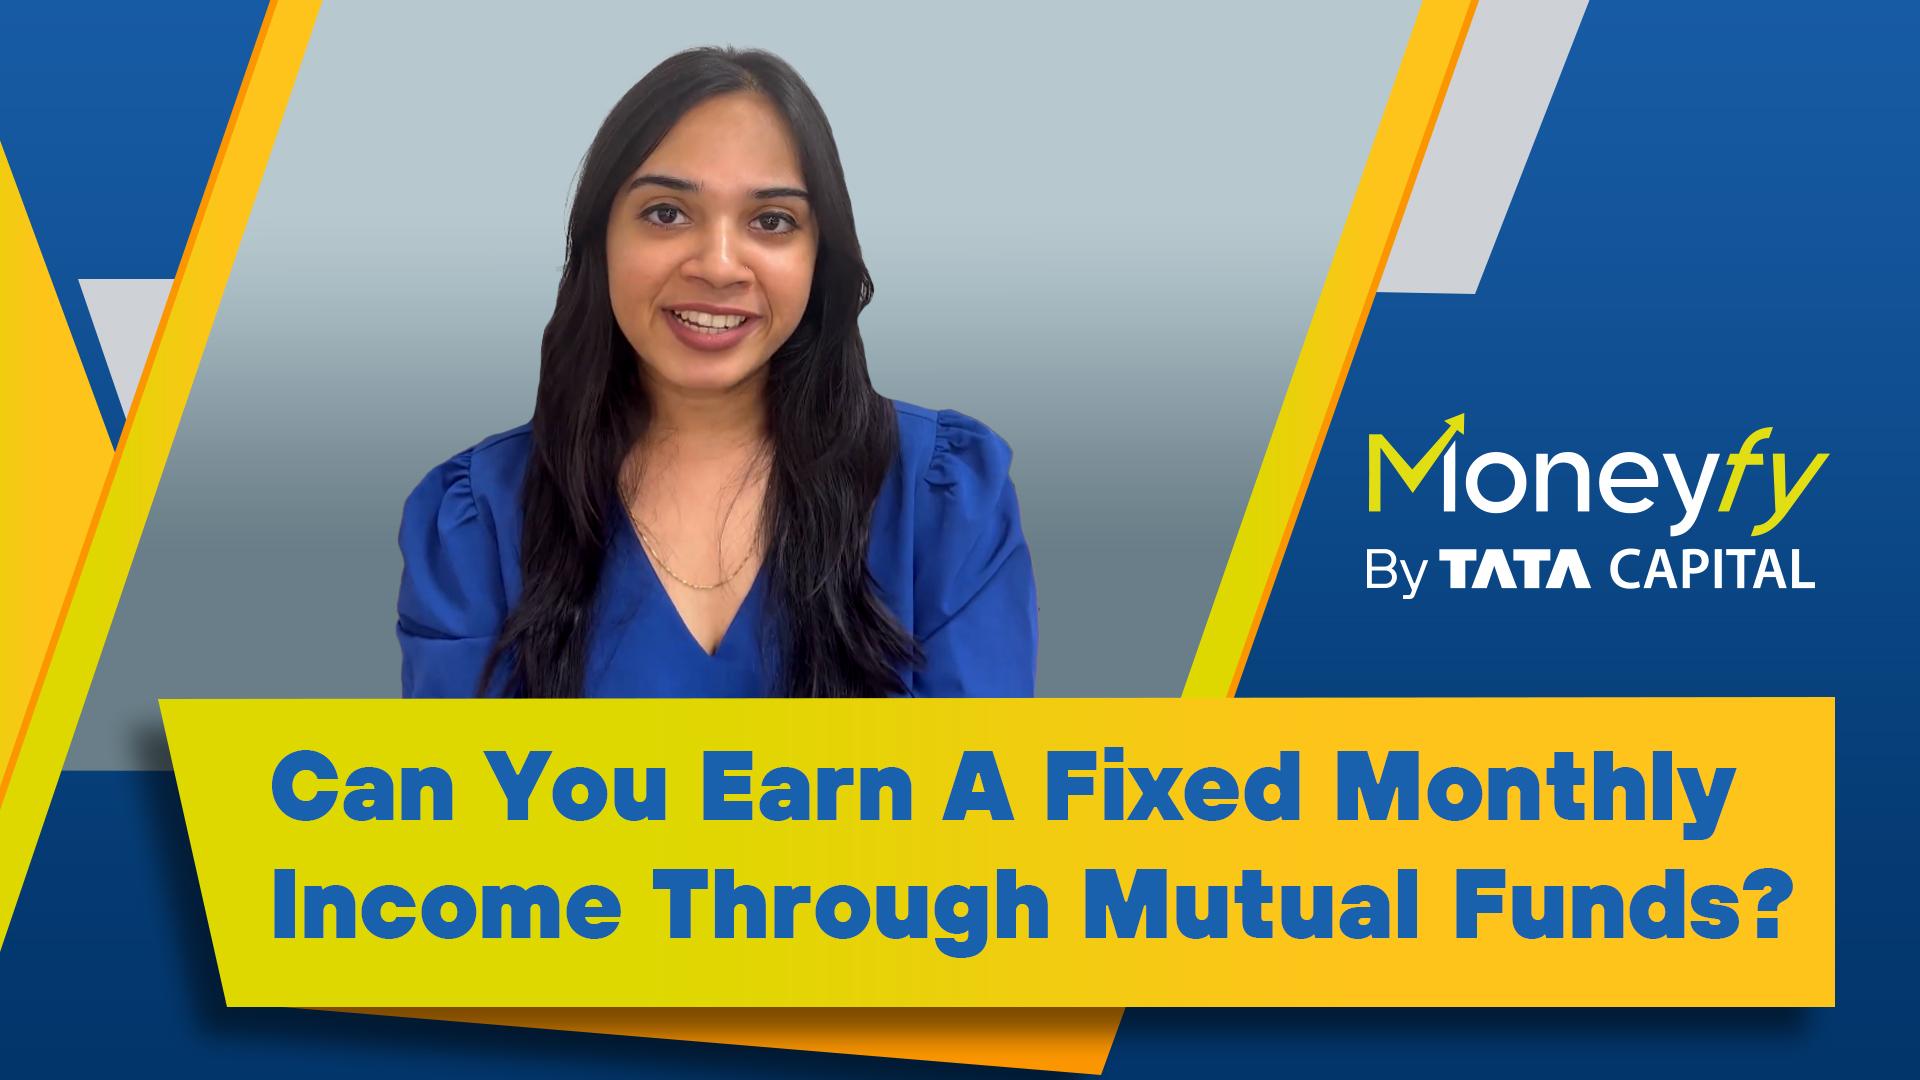 Can you earn a fixed monthly income through mutual funds?